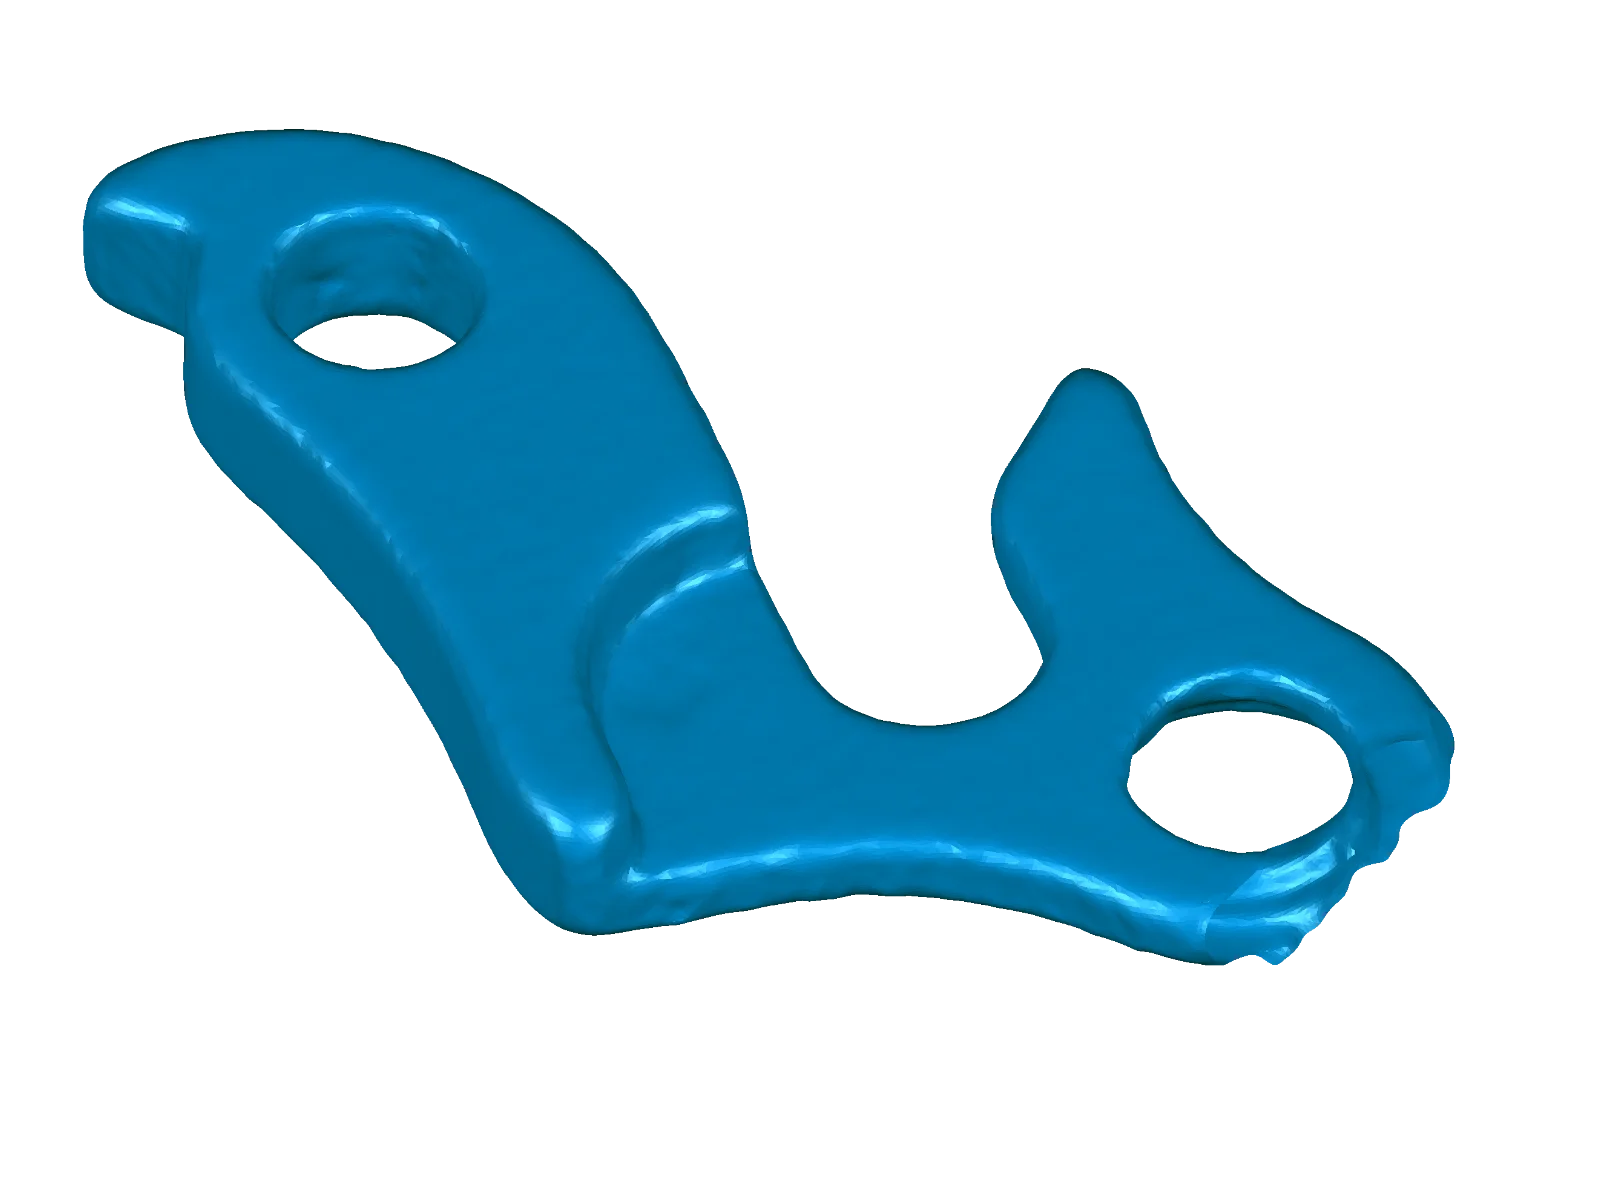 Blue STL mesh of the bike hanger created by 3D scanning.